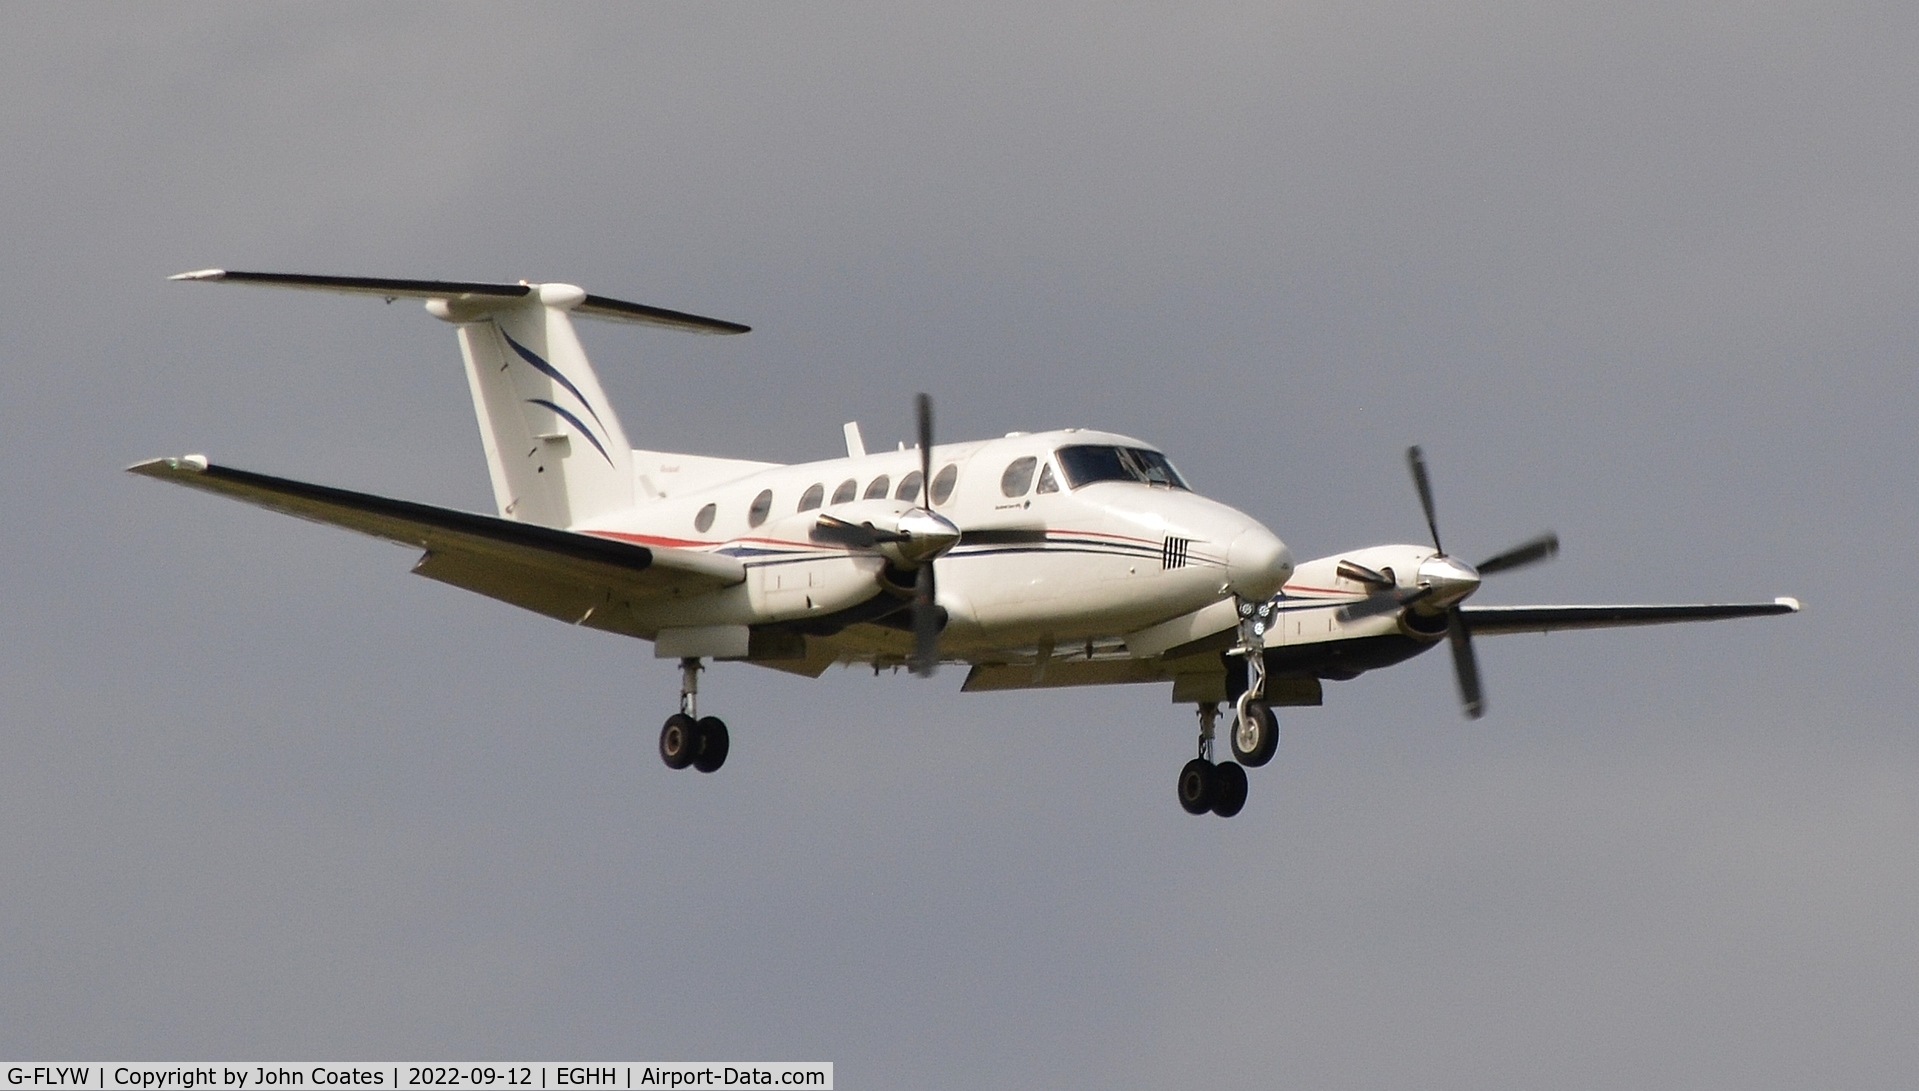 G-FLYW, 1977 Beech 200 Super King Air C/N BB-209, On approach to 08